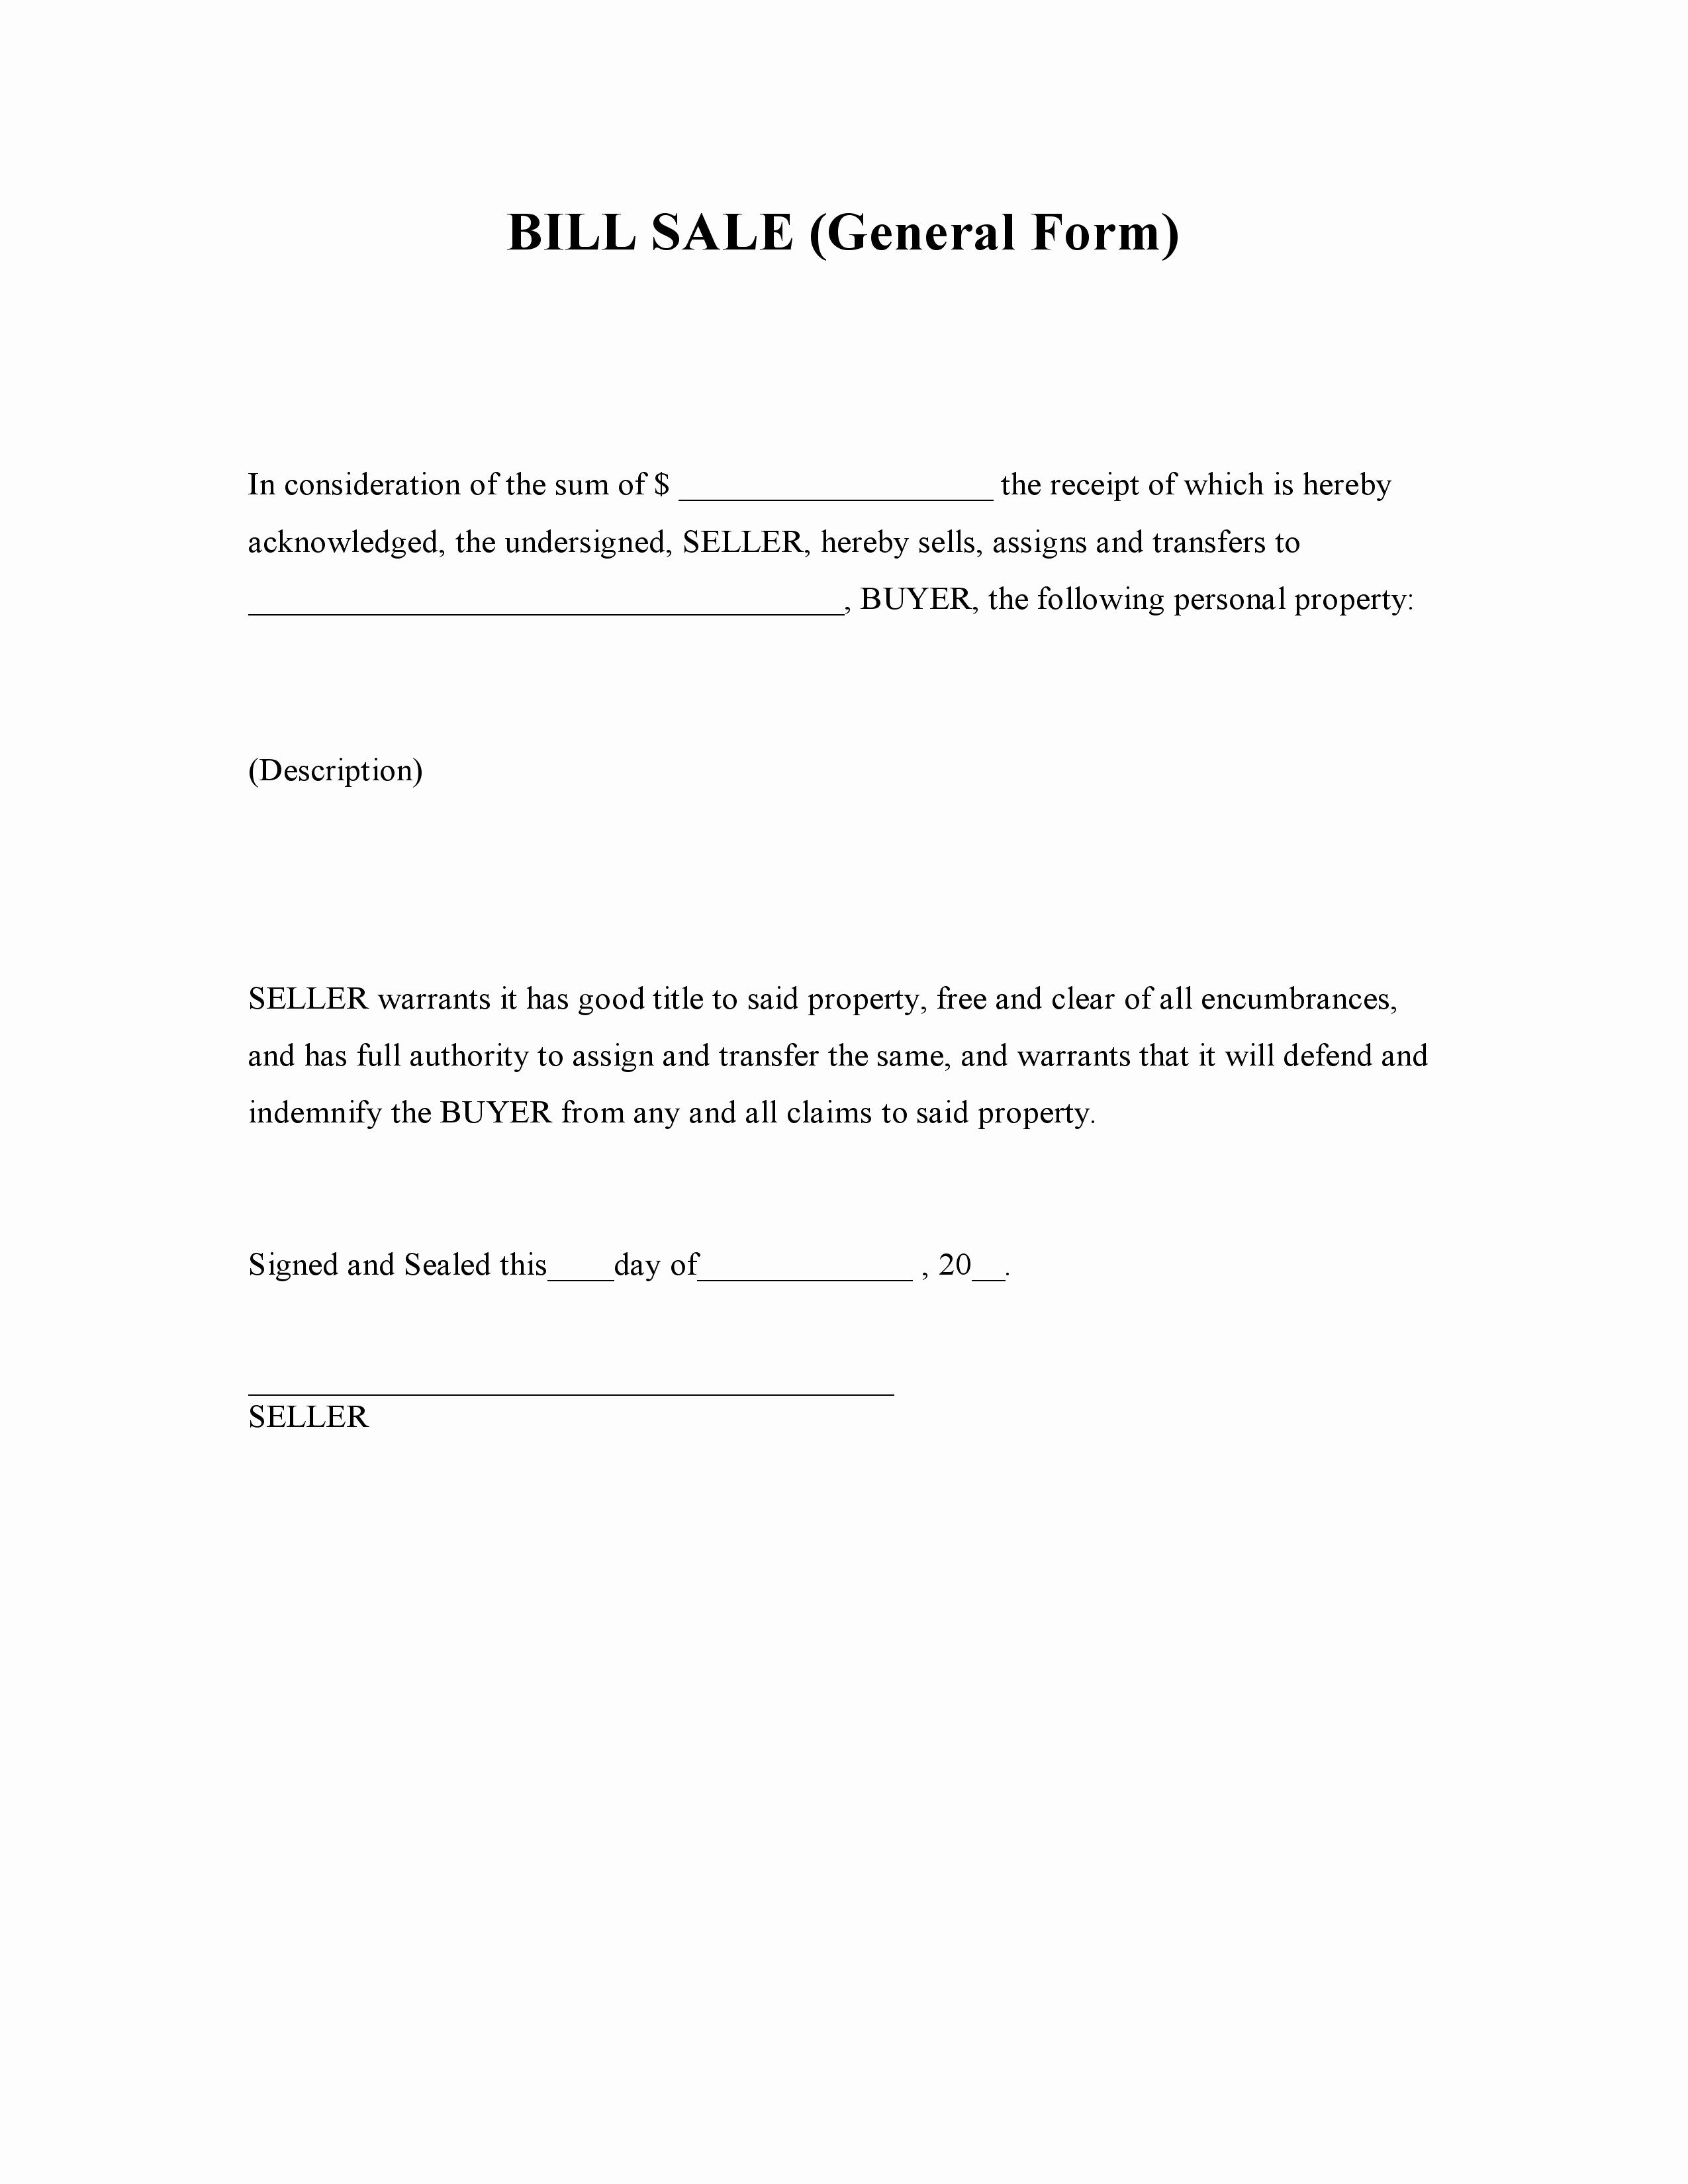 Bill Of Sale Generic form Awesome Free General Bill Of Sale form Pdf Word